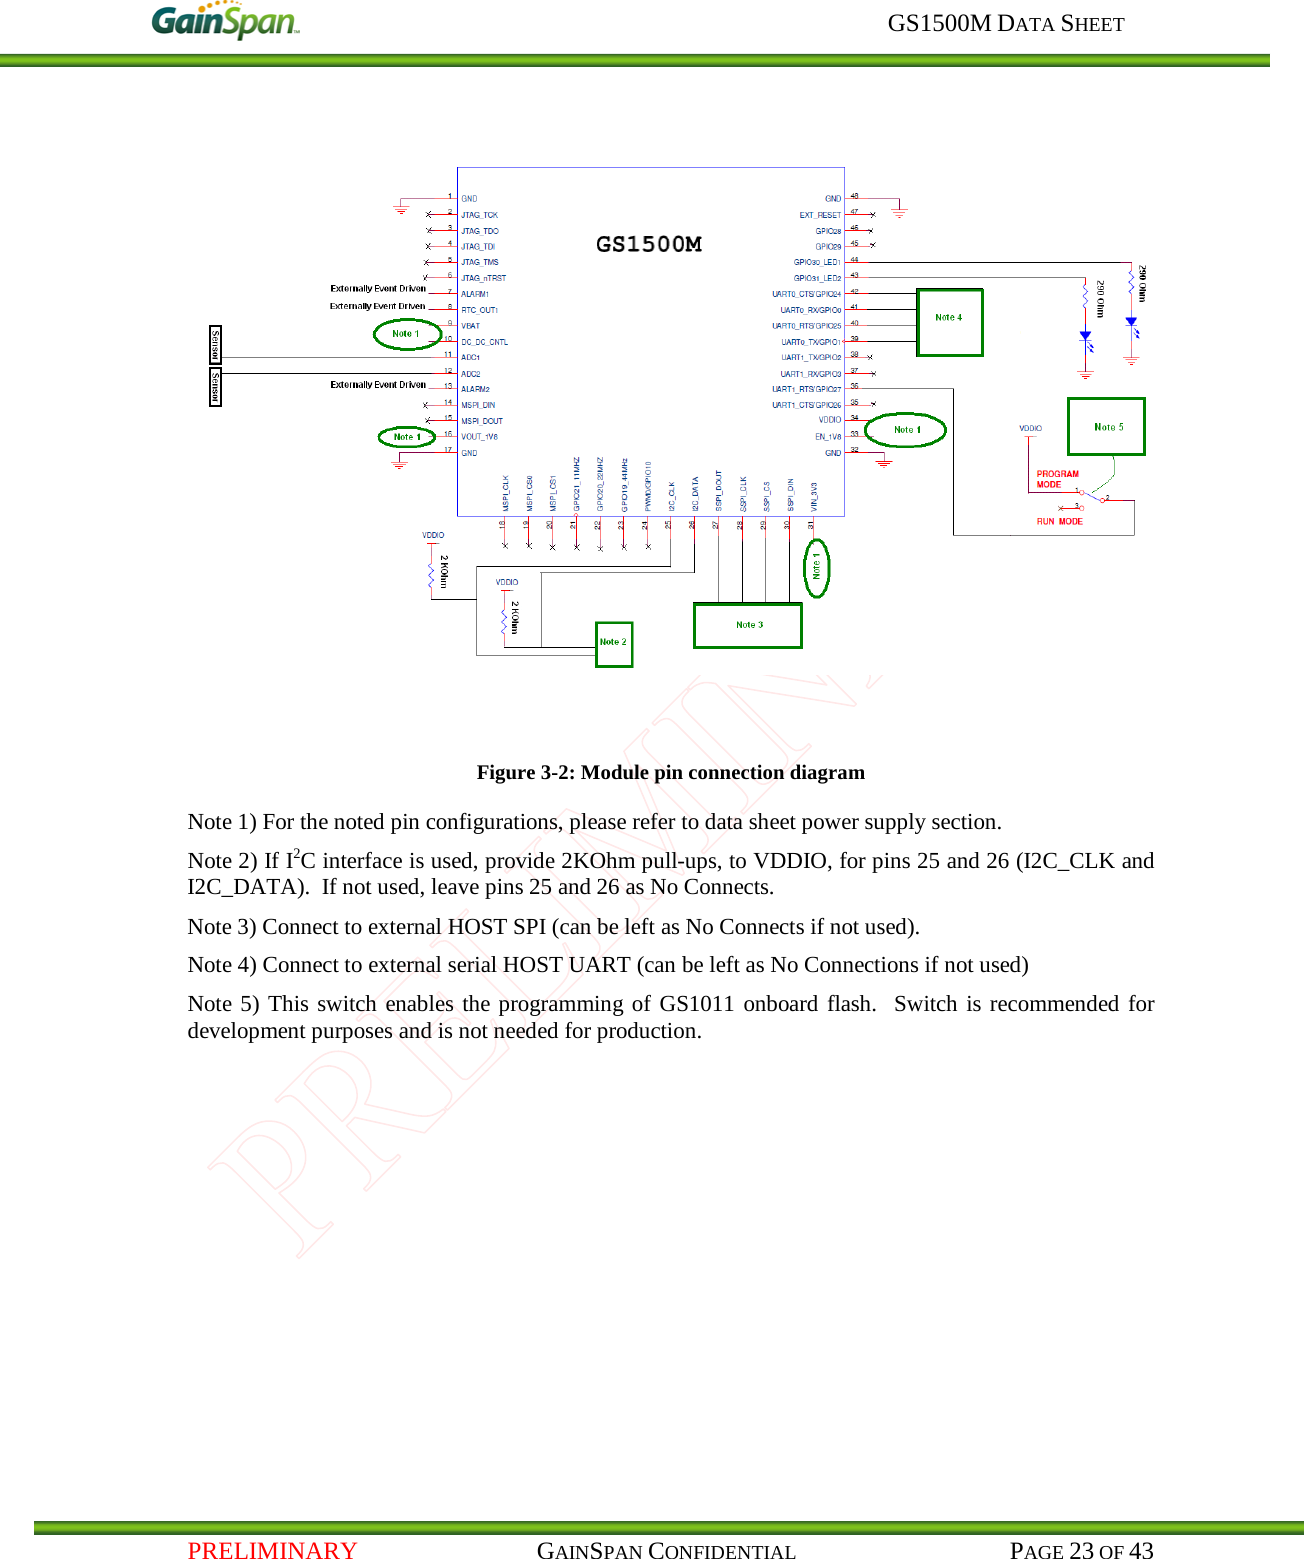     GS1500M DATA SHEET   PRELIMINARY                                    GAINSPAN CONFIDENTIAL                                           PAGE 23 OF 43     Figure 3-2: Module pin connection diagram  Note 1) For the noted pin configurations, please refer to data sheet power supply section. Note 2) If I2C interface is used, provide 2KOhm pull-ups, to VDDIO, for pins 25 and 26 (I2C_CLK and        I2C_DATA).  If not used, leave pins 25 and 26 as No Connects. Note 3) Connect to external HOST SPI (can be left as No Connects if not used). Note 4) Connect to external serial HOST UART (can be left as No Connections if not used) Note 5) This switch enables the programming of GS1011 onboard flash.  Switch is recommended for development purposes and is not needed for production.       